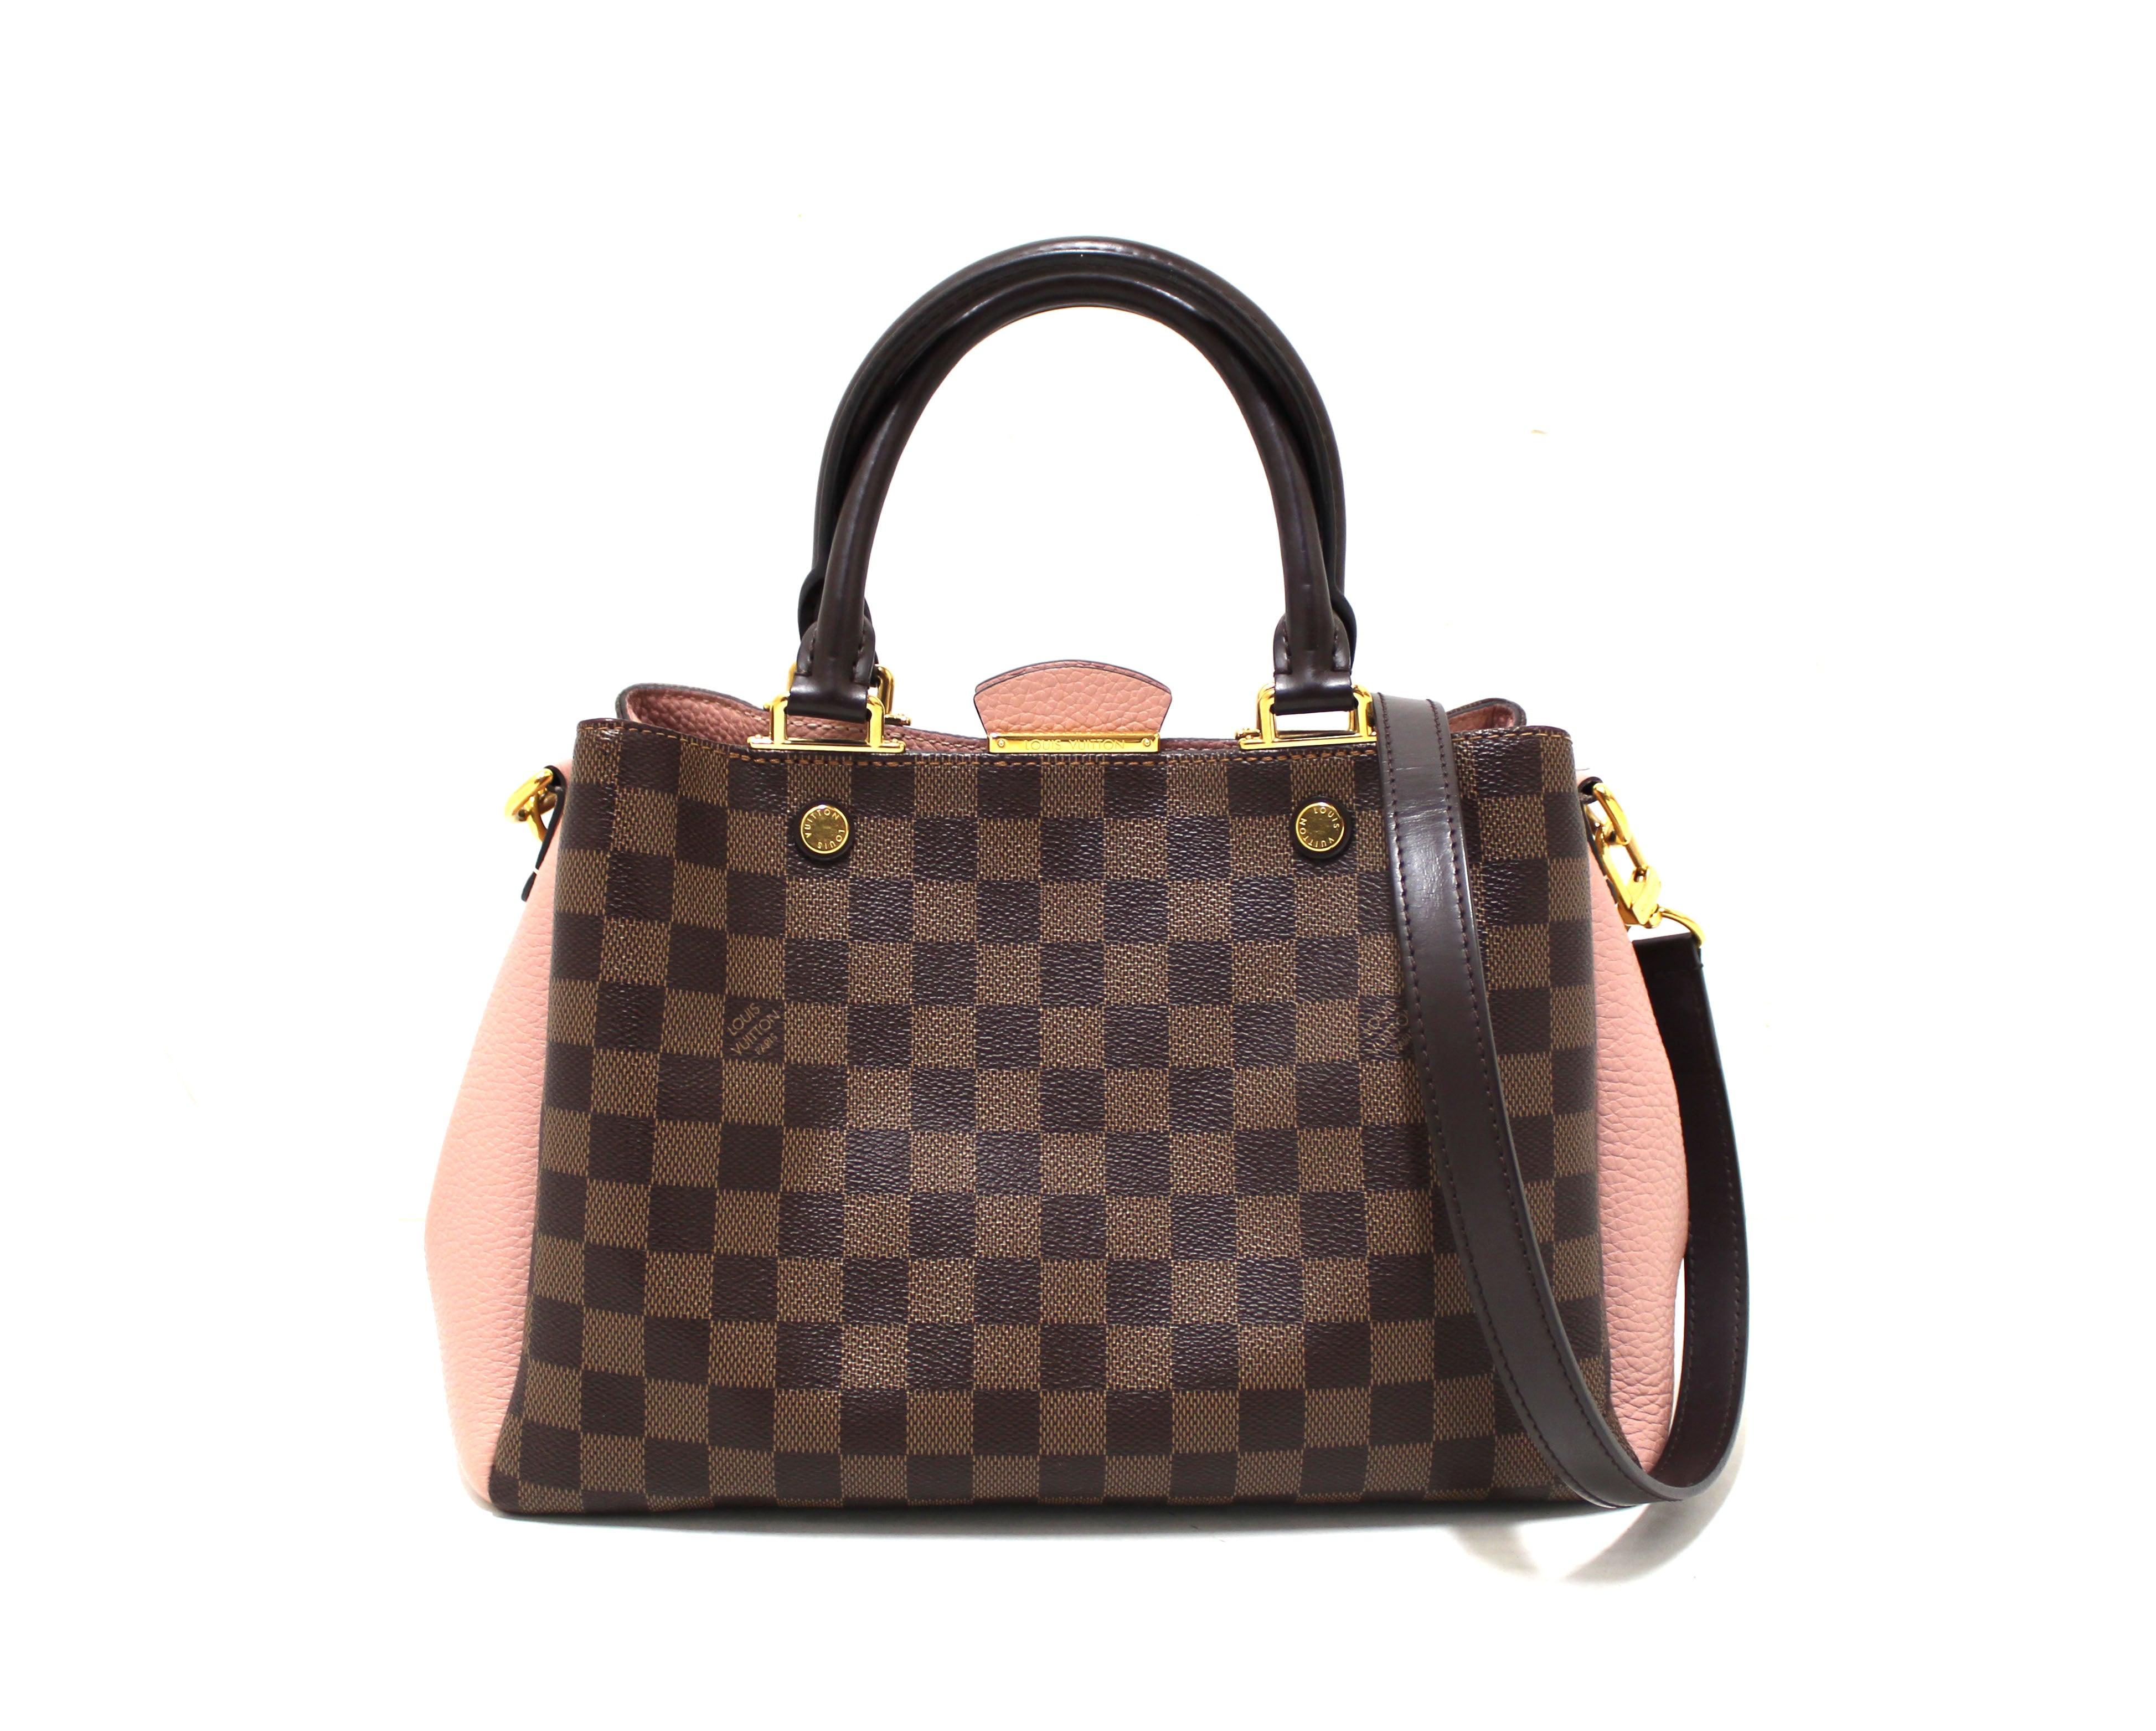 Authentic Louis Vuitton Damier Ebene Canvas With Pink Leather